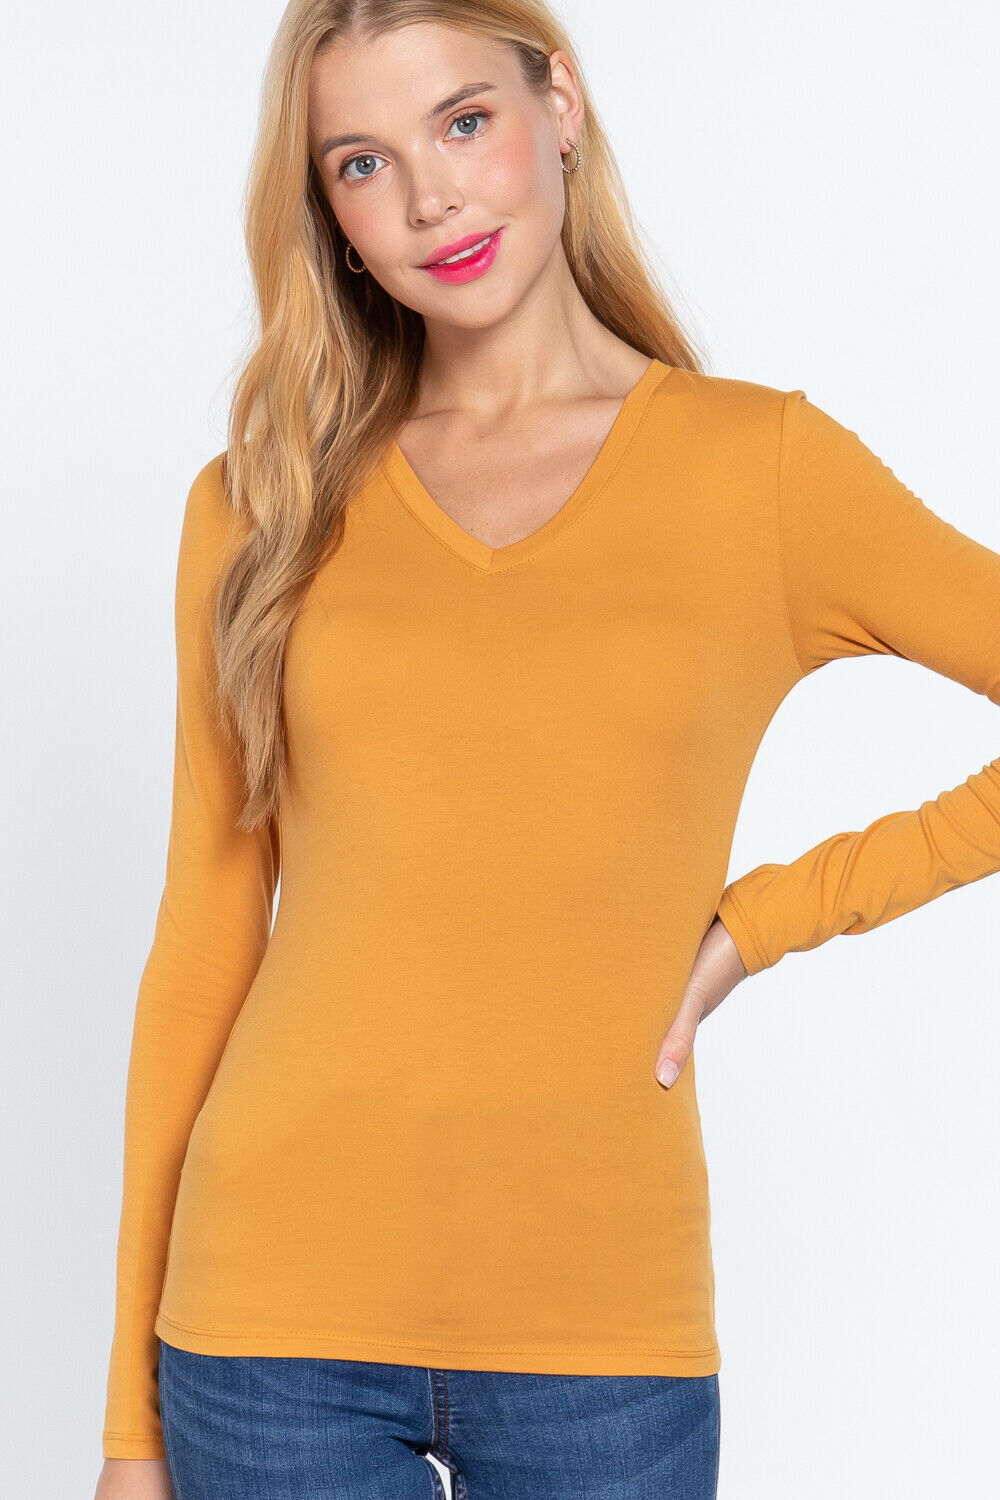 T Shirt V Neck Long Sleeve Active Basic Top Size S-XL Plus 1X-2X   STORE CLOSING